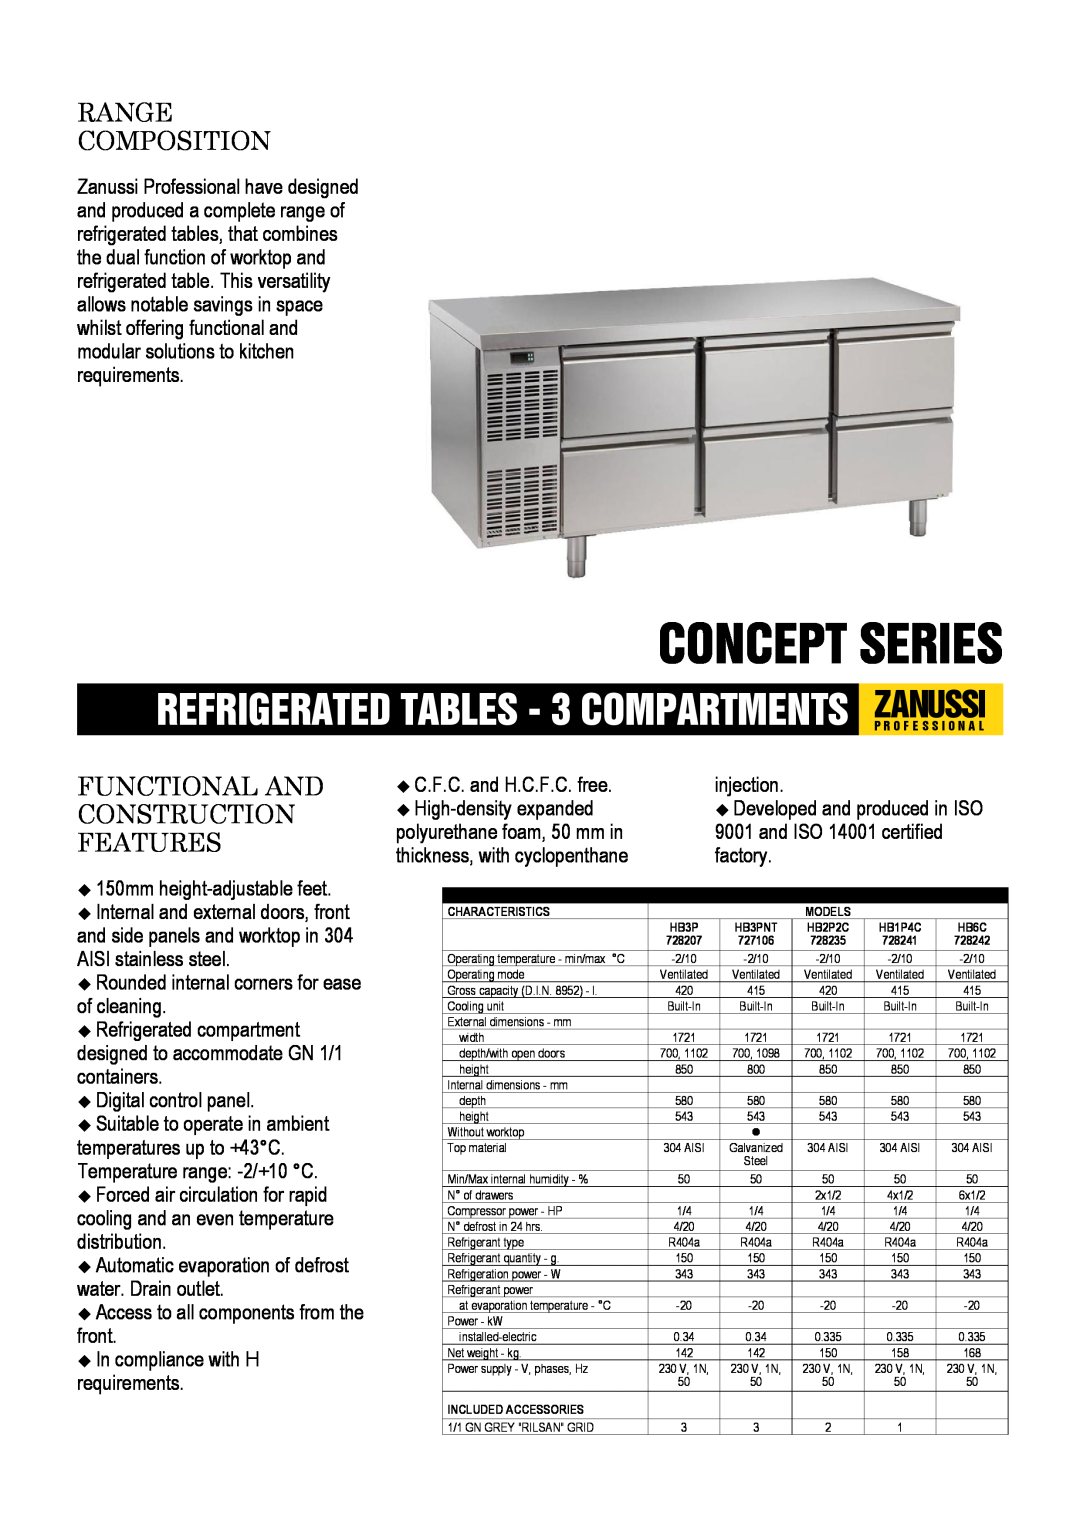 Electrolux 728207, 727106 dimensions Concept Series, REFRIGERATED TABLES - 3 COMPARTMENTS ZANUSSIP R O F E S S I O N A L 